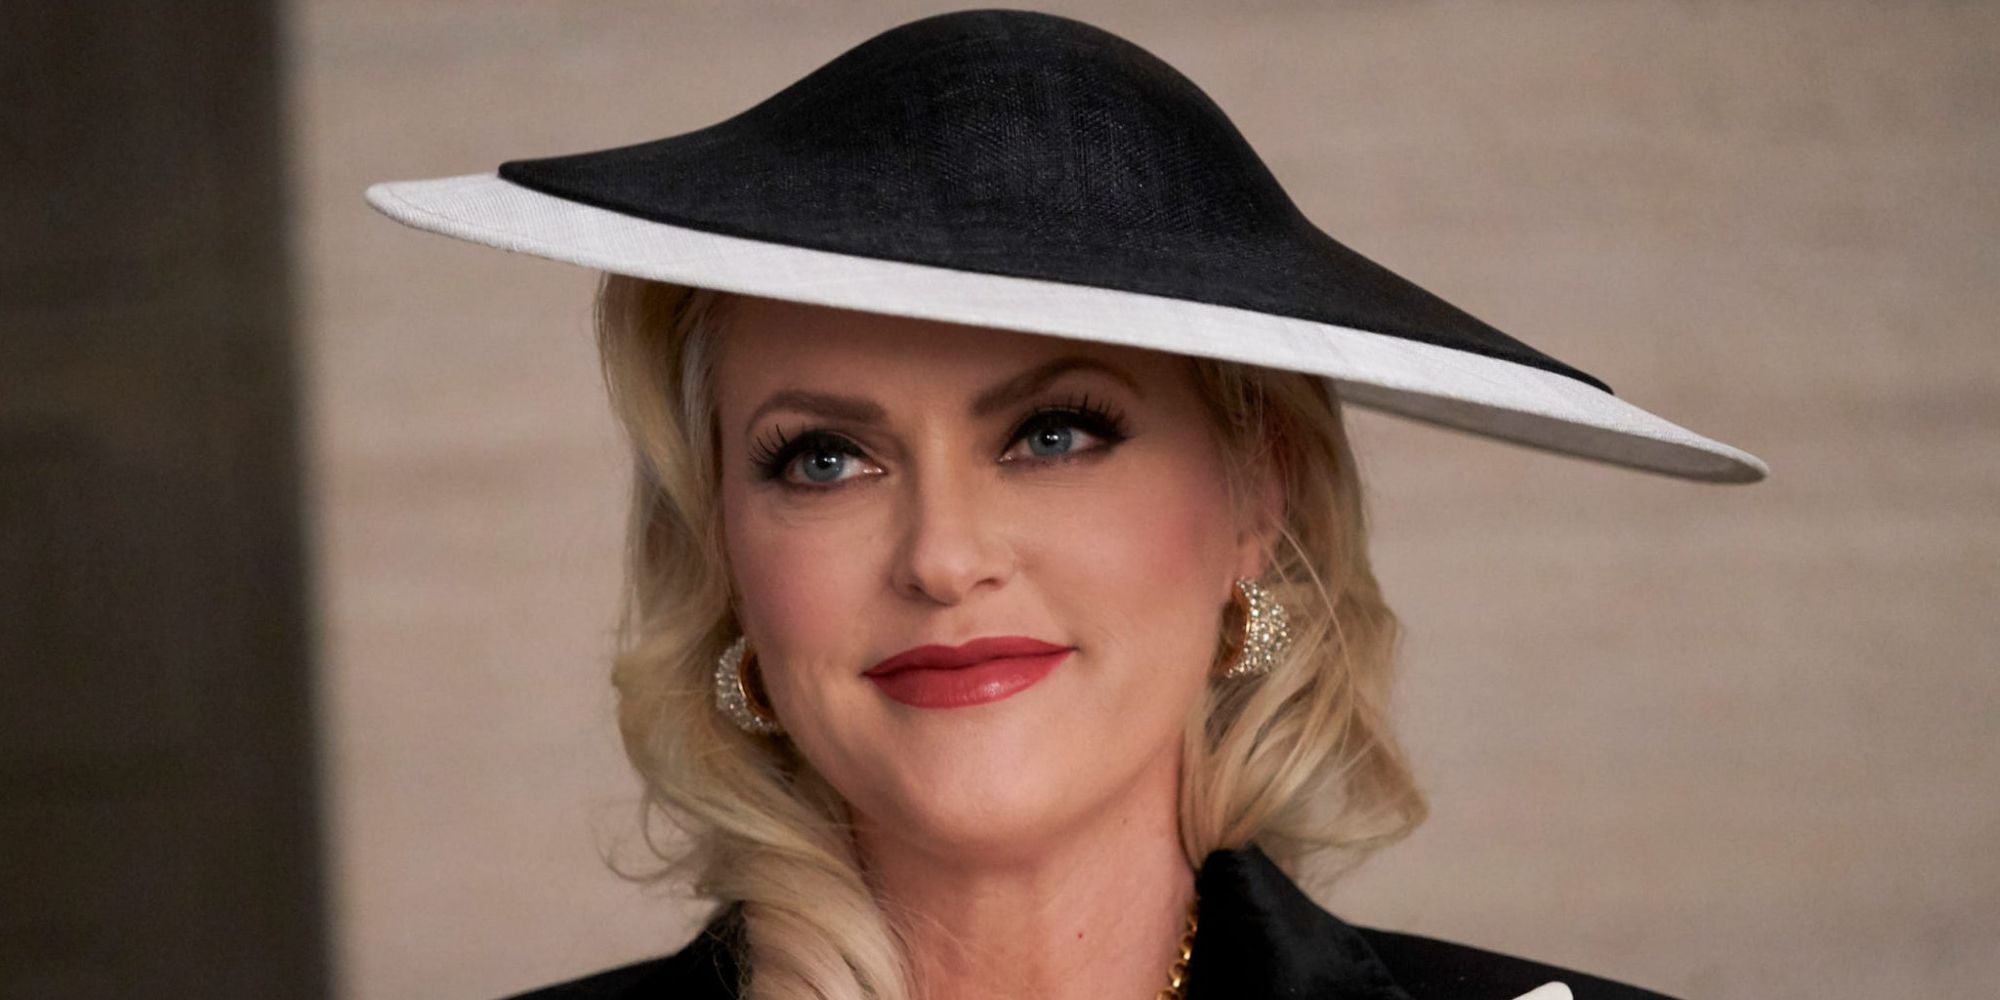 Elaine Hendrix as Alexis from Dynasty wearing a wide-brimmed hat.